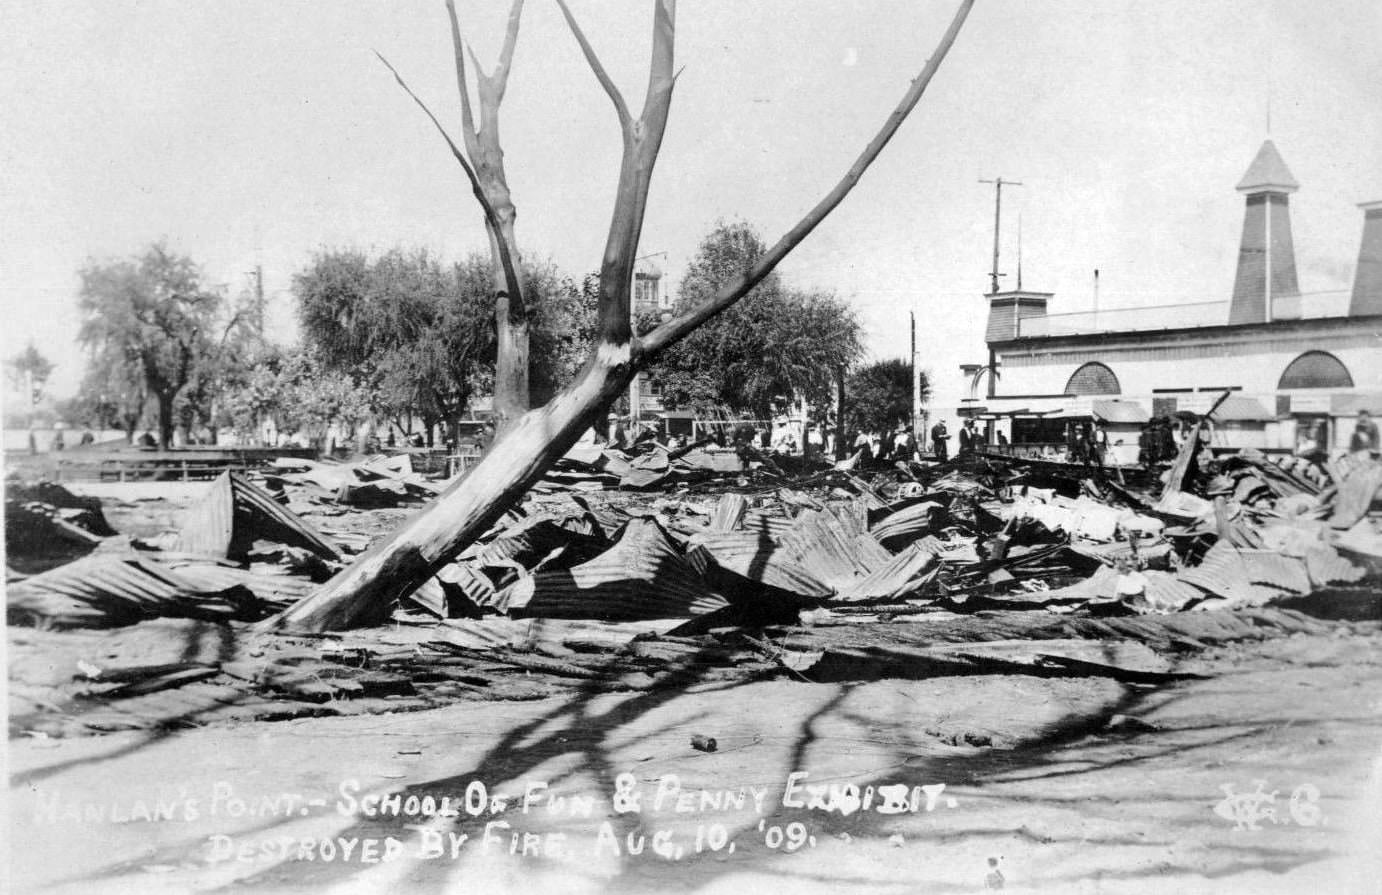 School of Fun and Penny Exhibit destroyed by fire at Hanlan's Point, Toronto Islands, Aug 10, 1909